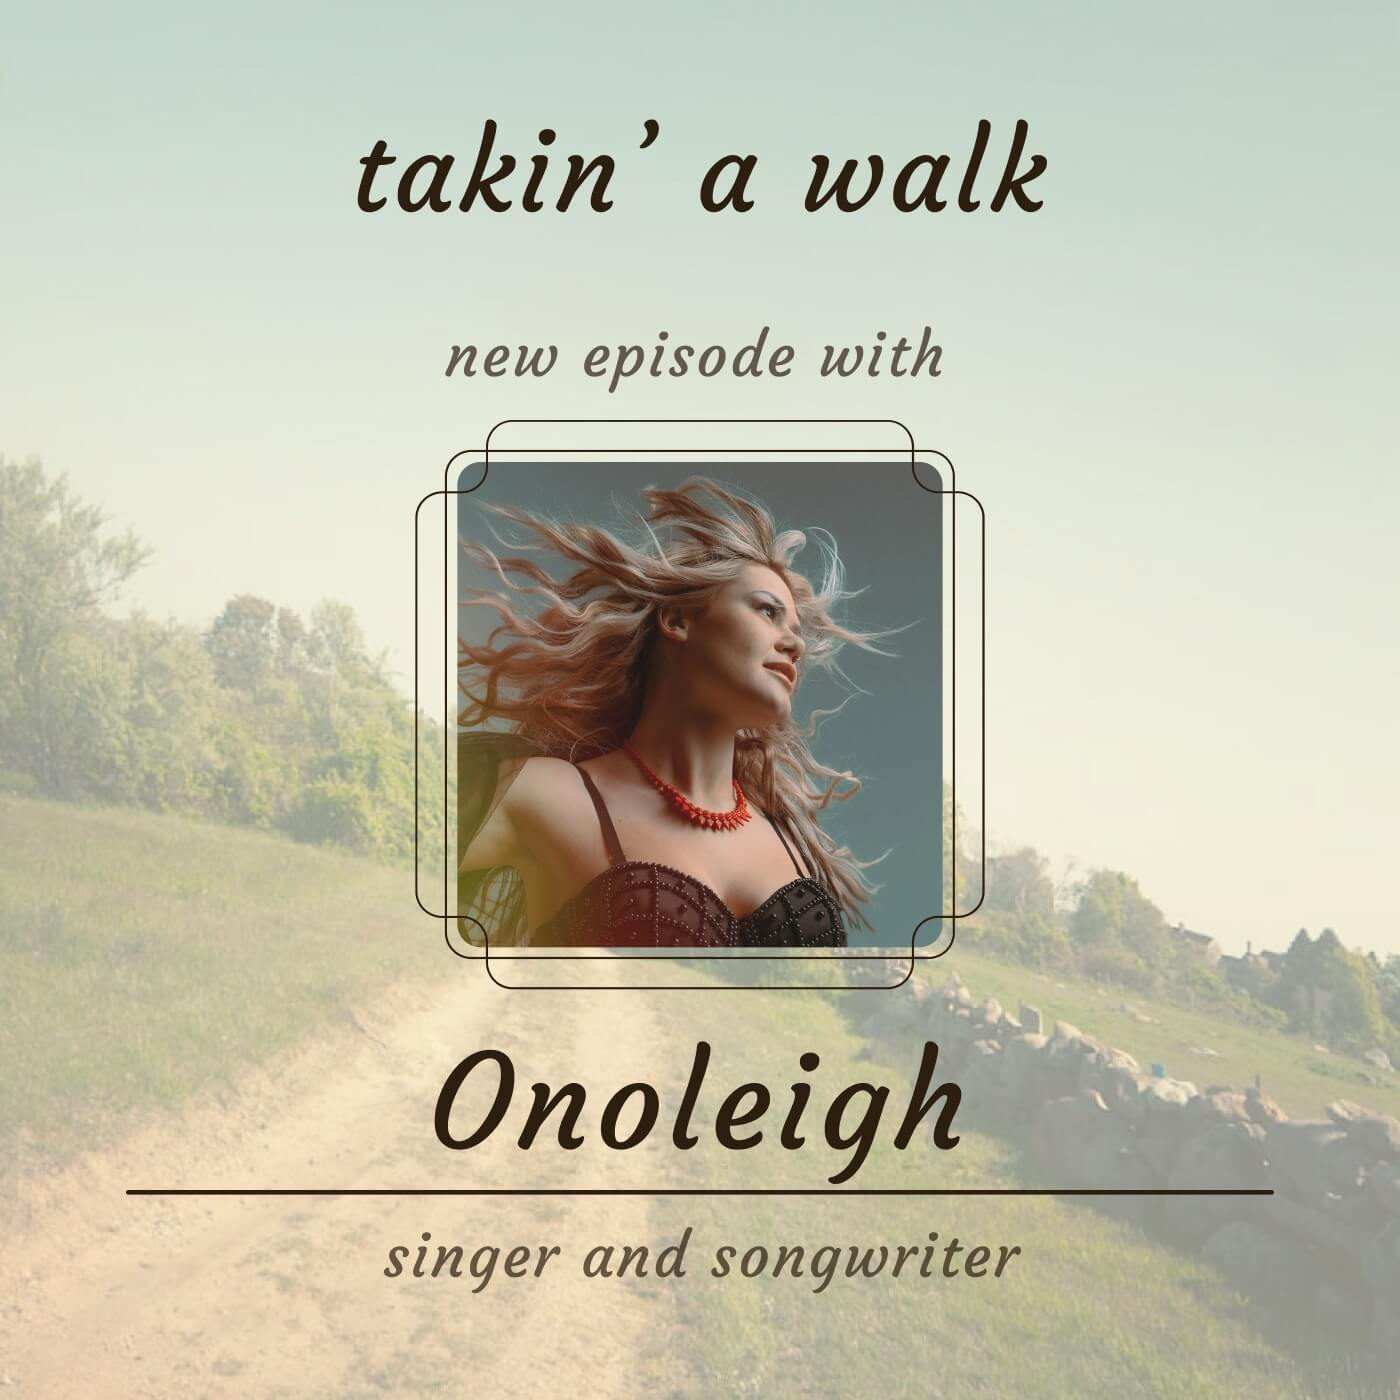 Upcoming Episode Promo - Rising Country Artist Onoleigh